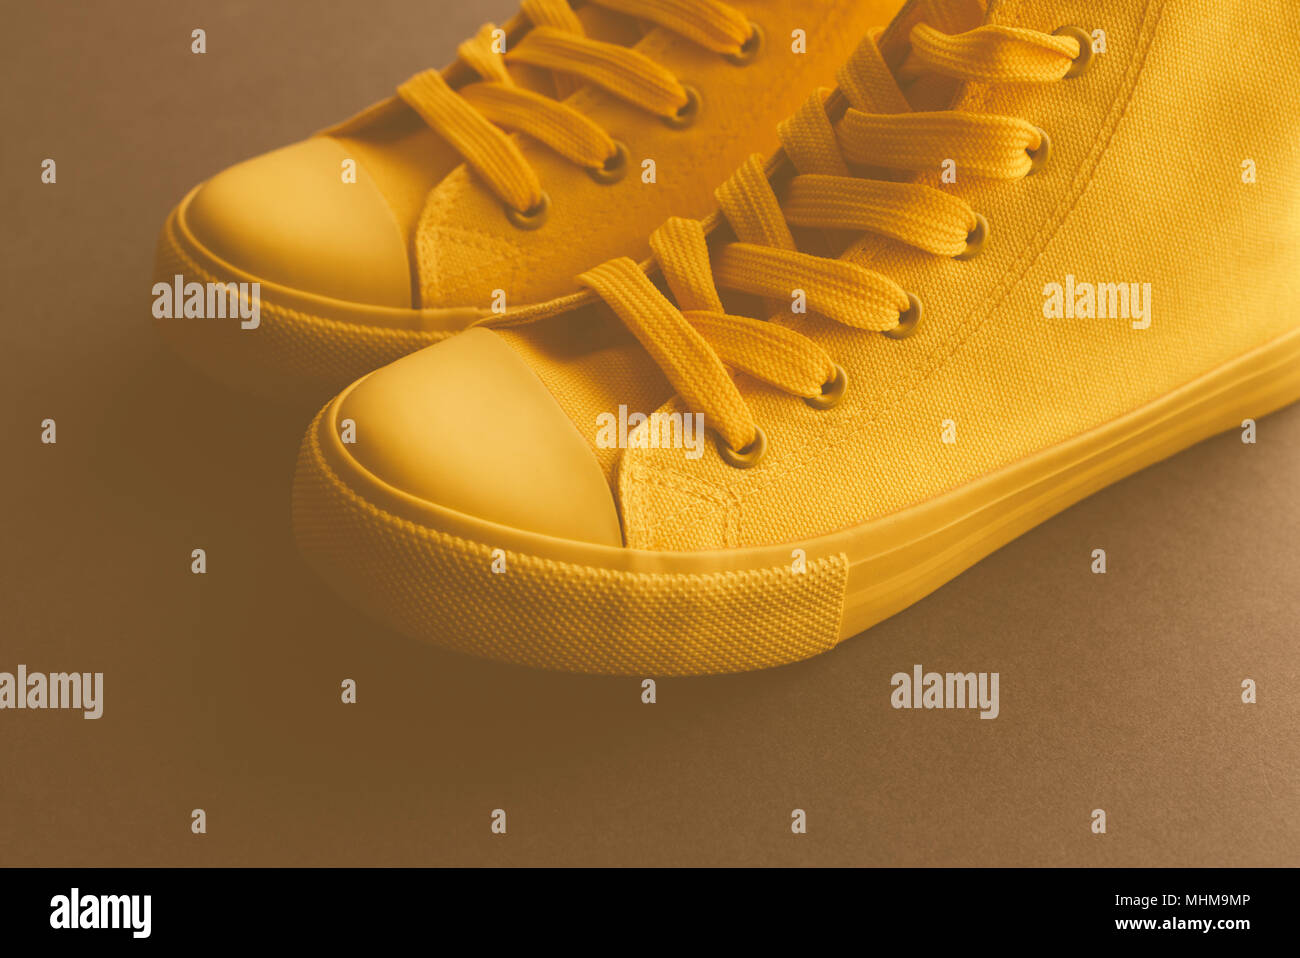 Brand new yellow sneakers on the floor, retro toned youth lifestyle footwear concept with copy space Stock Photo